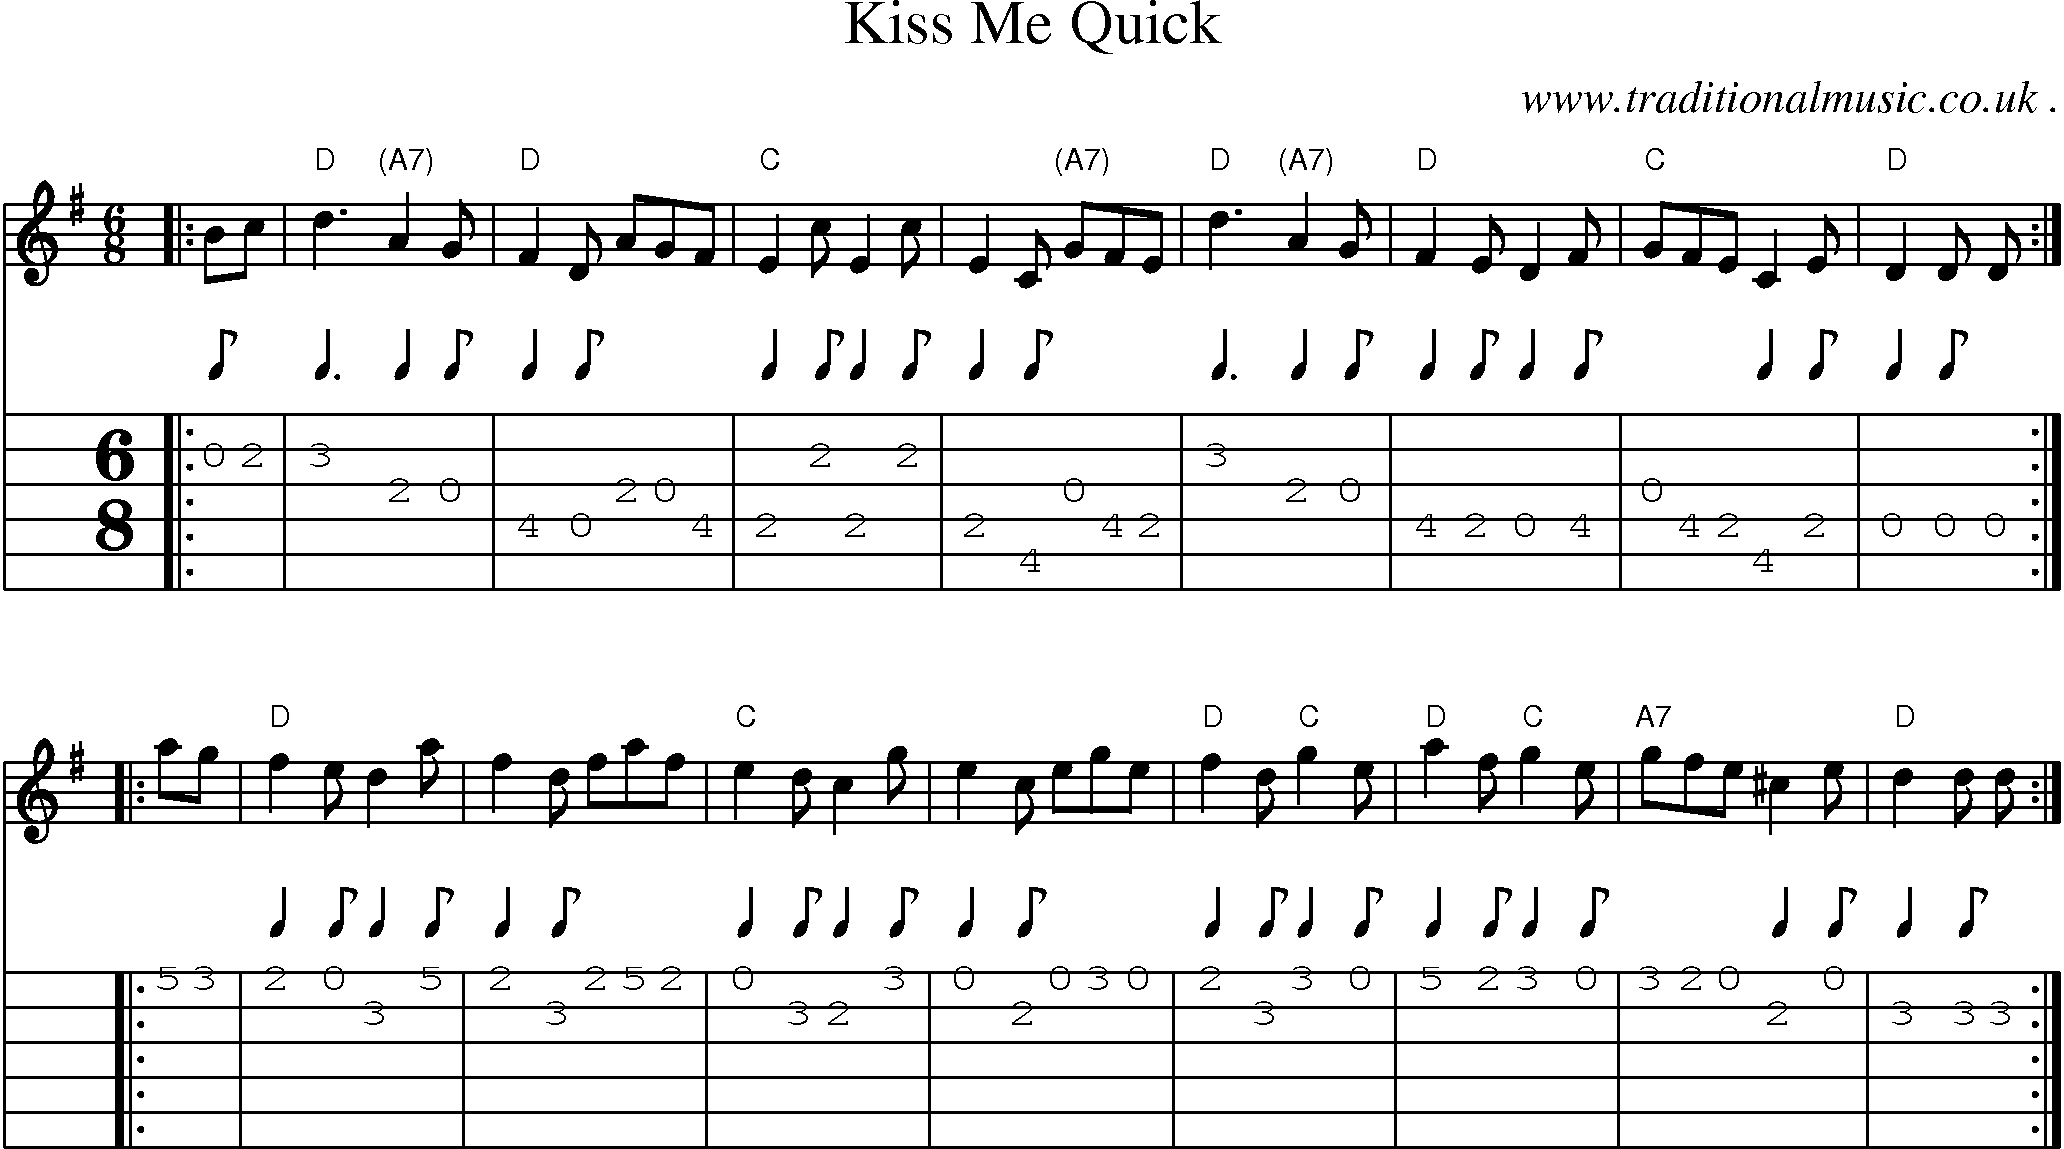 Sheet-music  score, Chords and Guitar Tabs for Kiss Me Quick